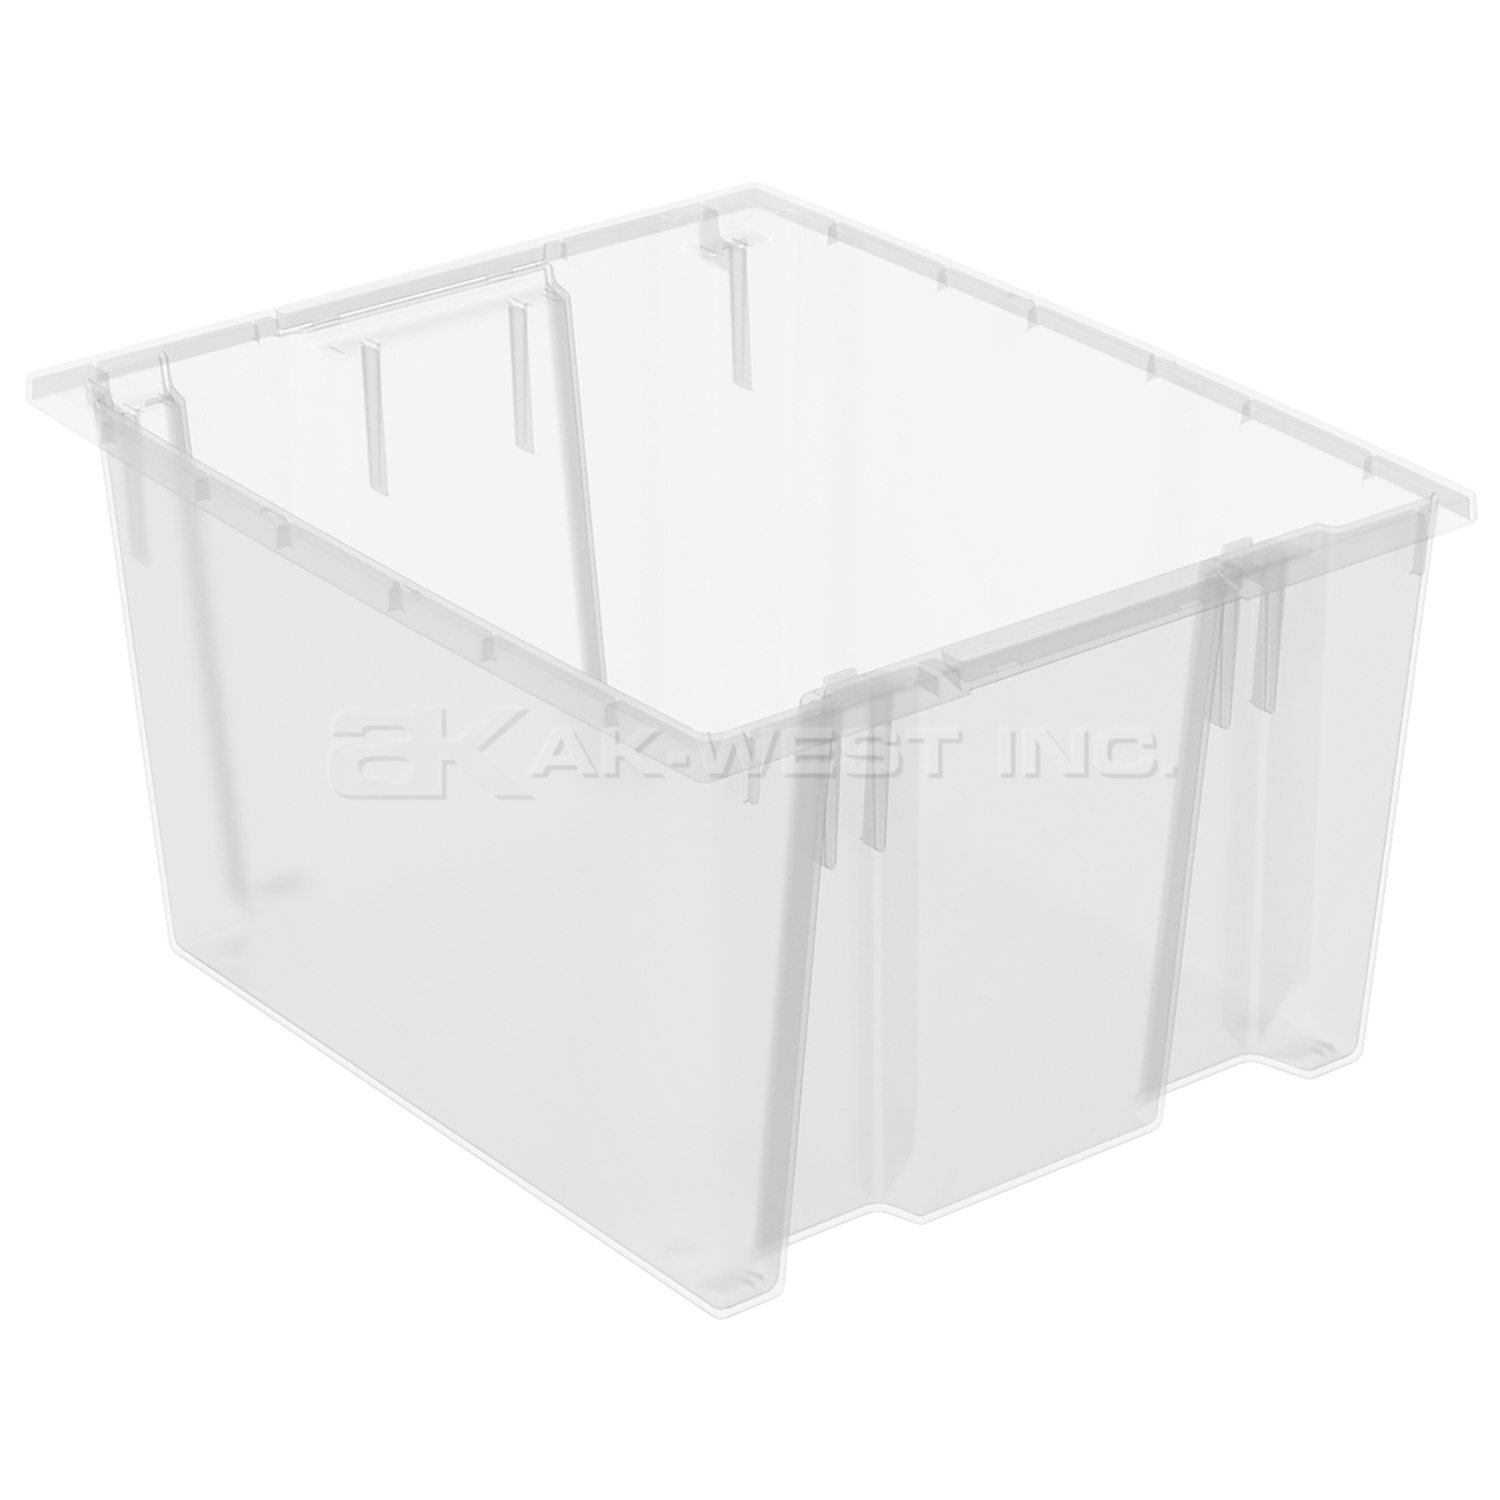 Clear, 23-1/2" x 19-1/2" x 13" Nest and Stack Tote (3 Per Carton)